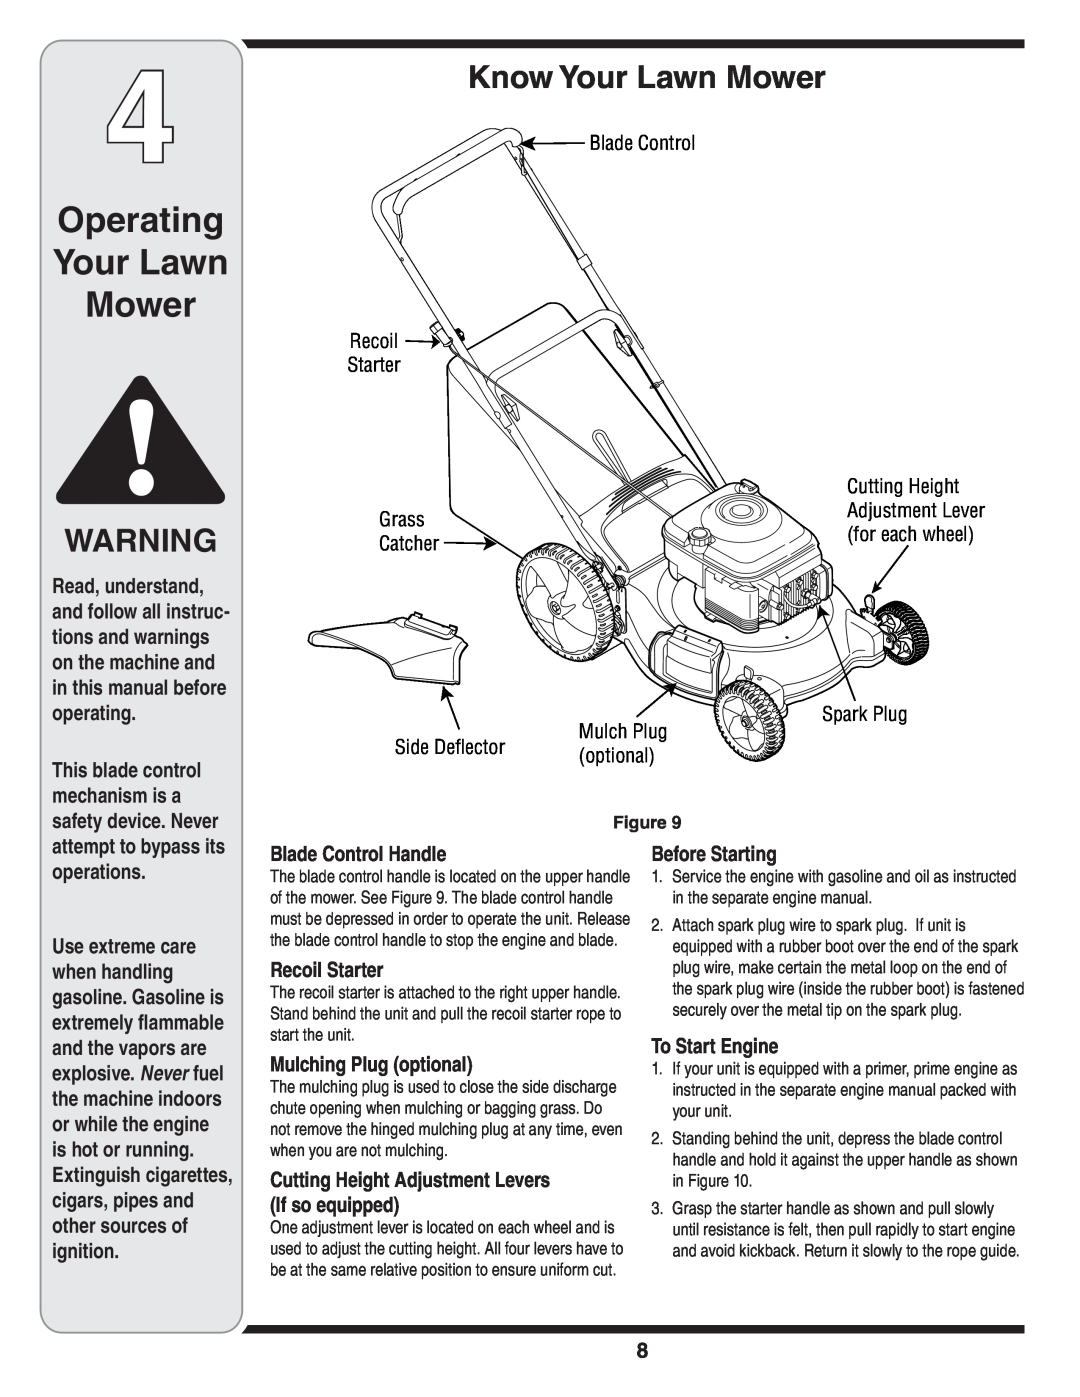 MTD 60-1622-0 warranty Operating Your Lawn Mower, Know Your Lawn Mower 